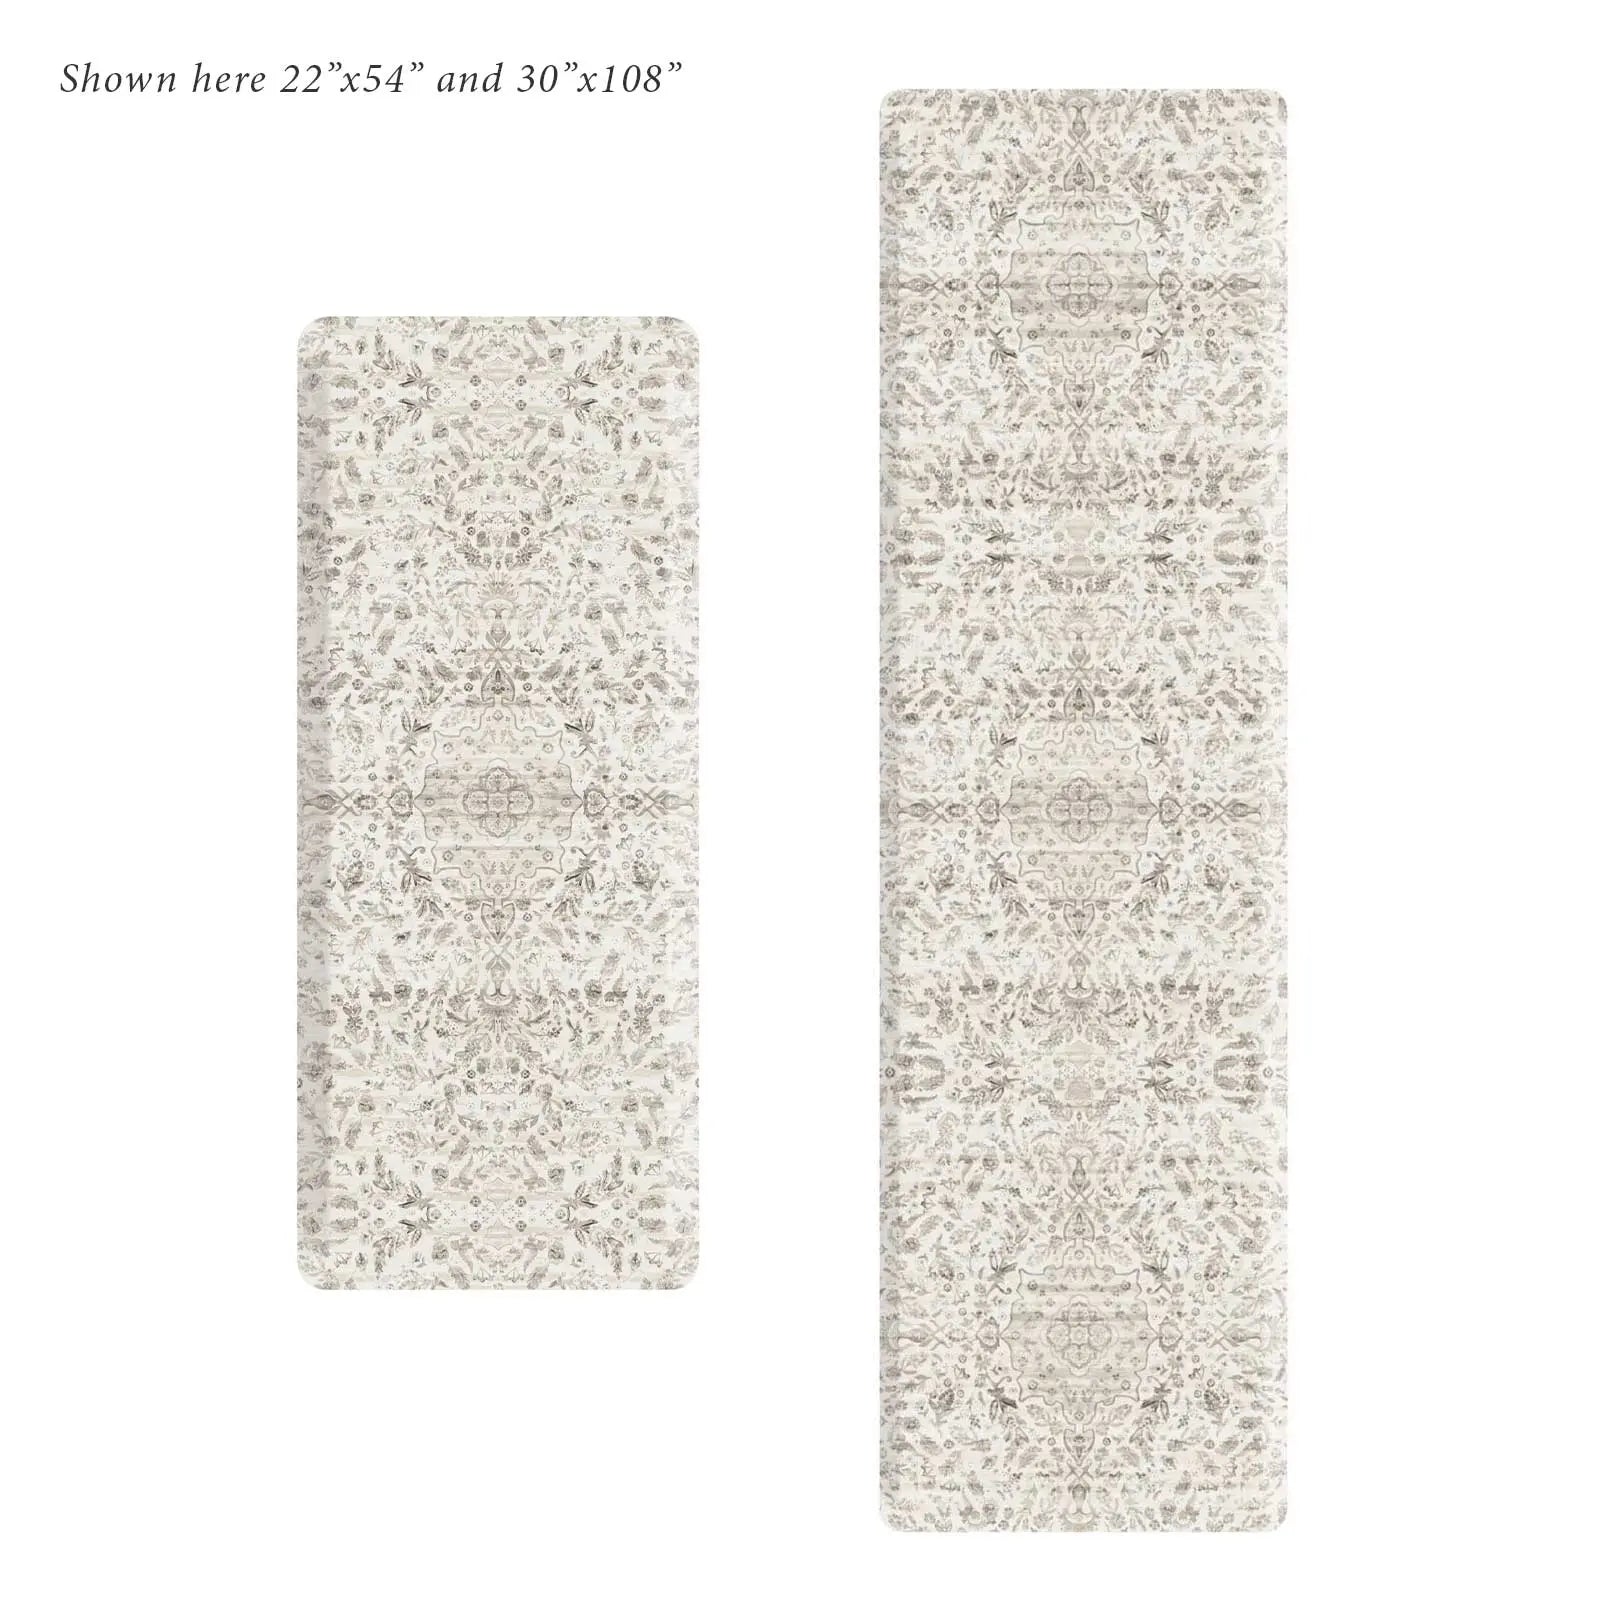 Emile latte beige and gray floral boho kitchen mat shown in sizes 22x54 and 30x108